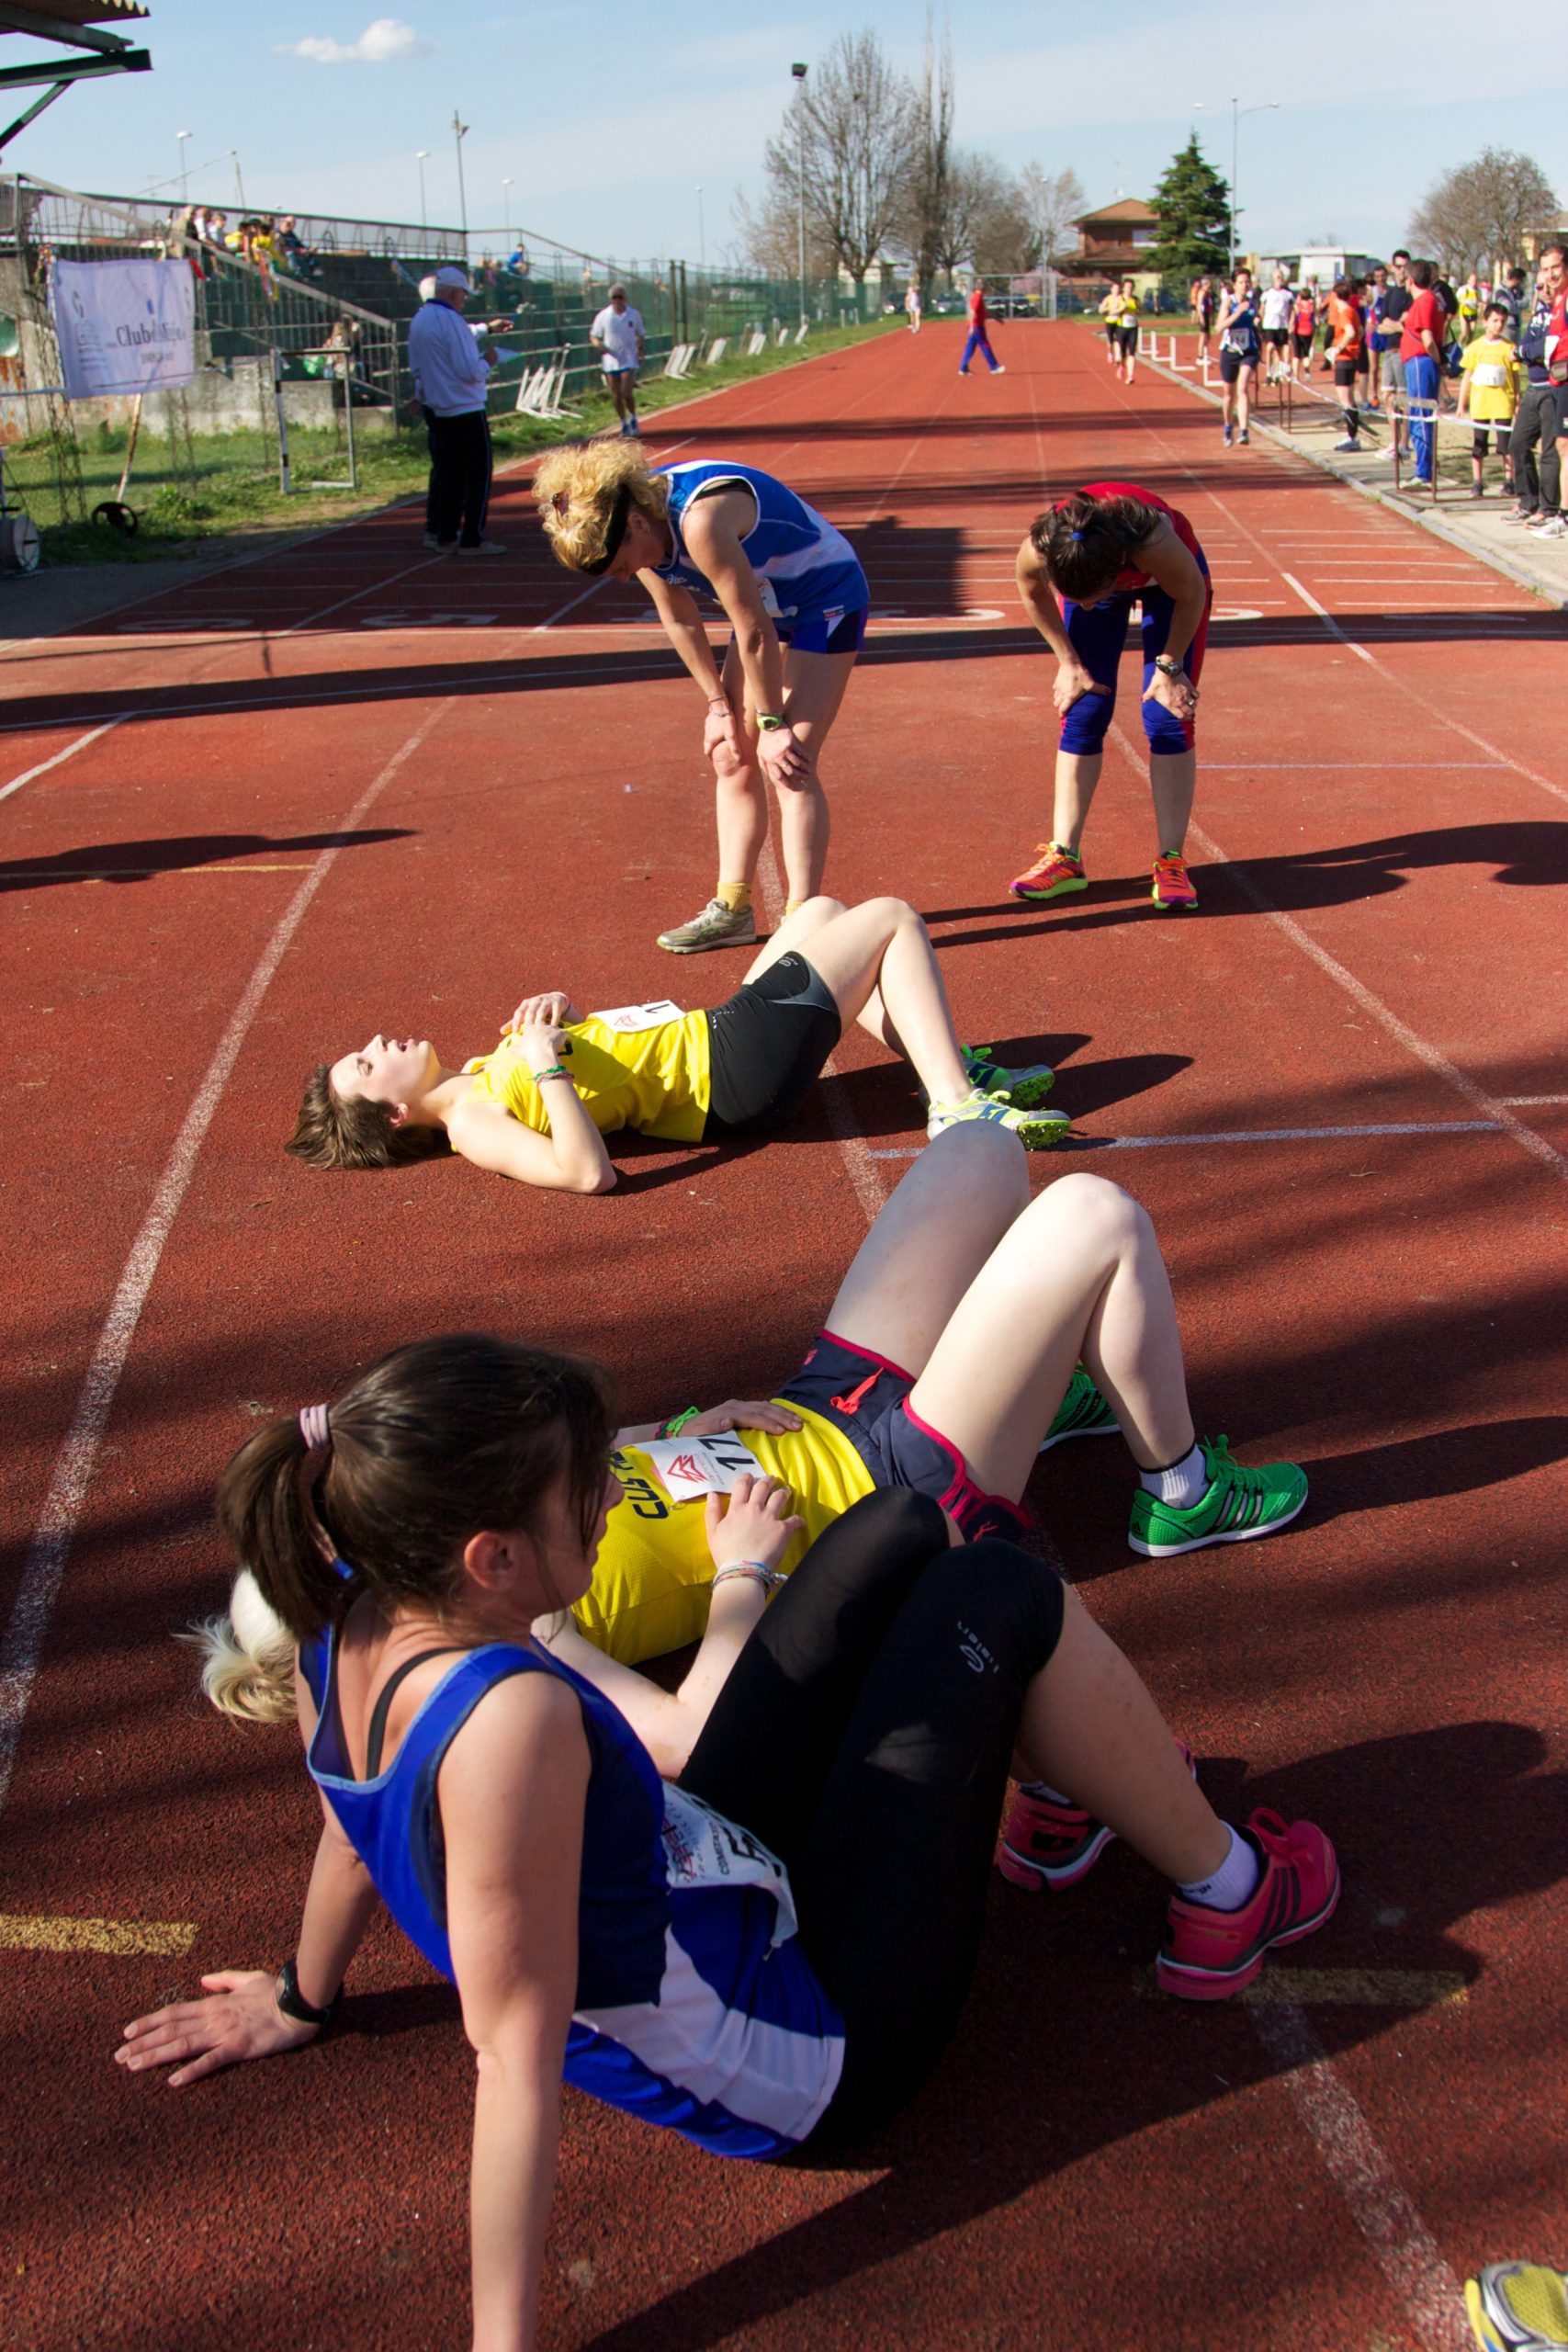 Image shows female track and field runners resting after a race. Three women are resting on the ground and two are leaning over with their hands on their knees, catching their breathe.